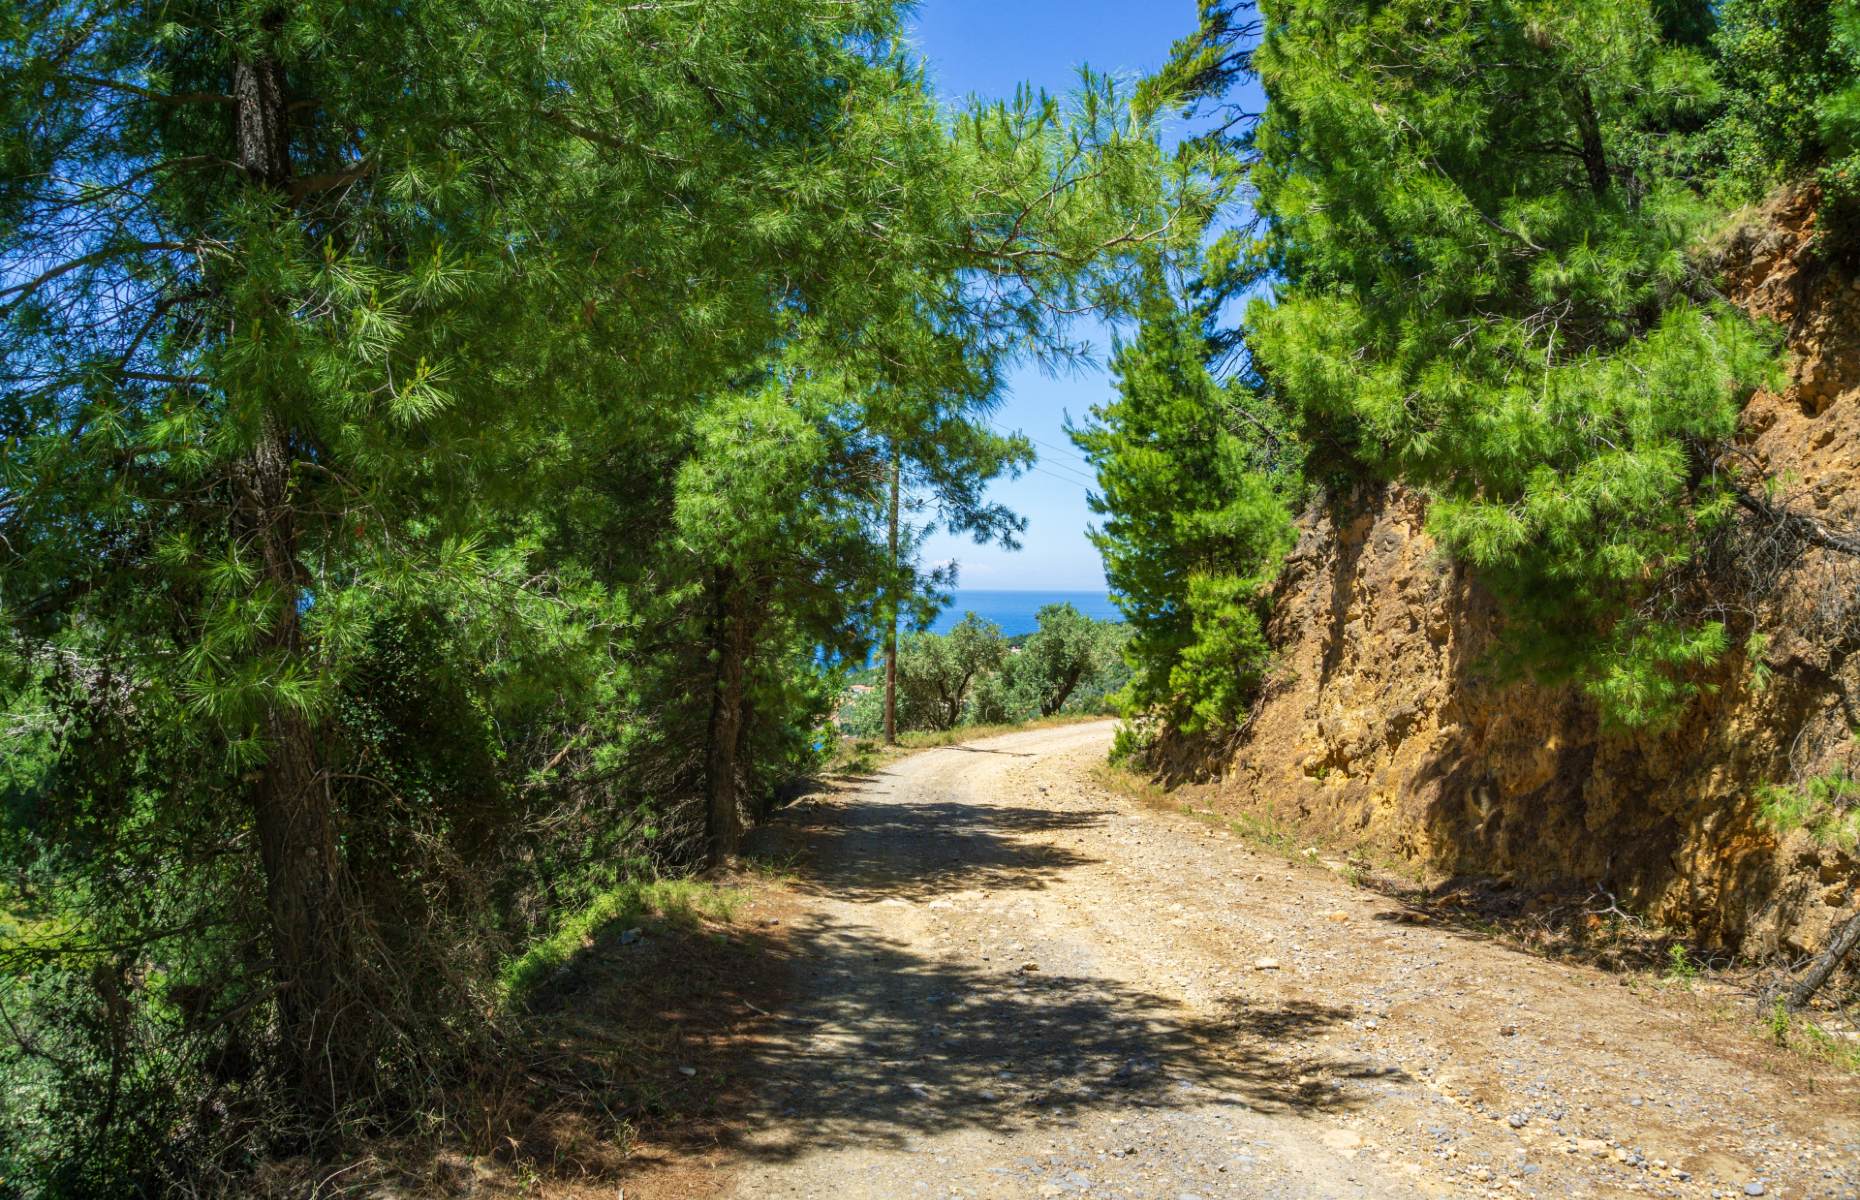 Forest Hiking Sporades (Image: PitStock/Shutterstock)